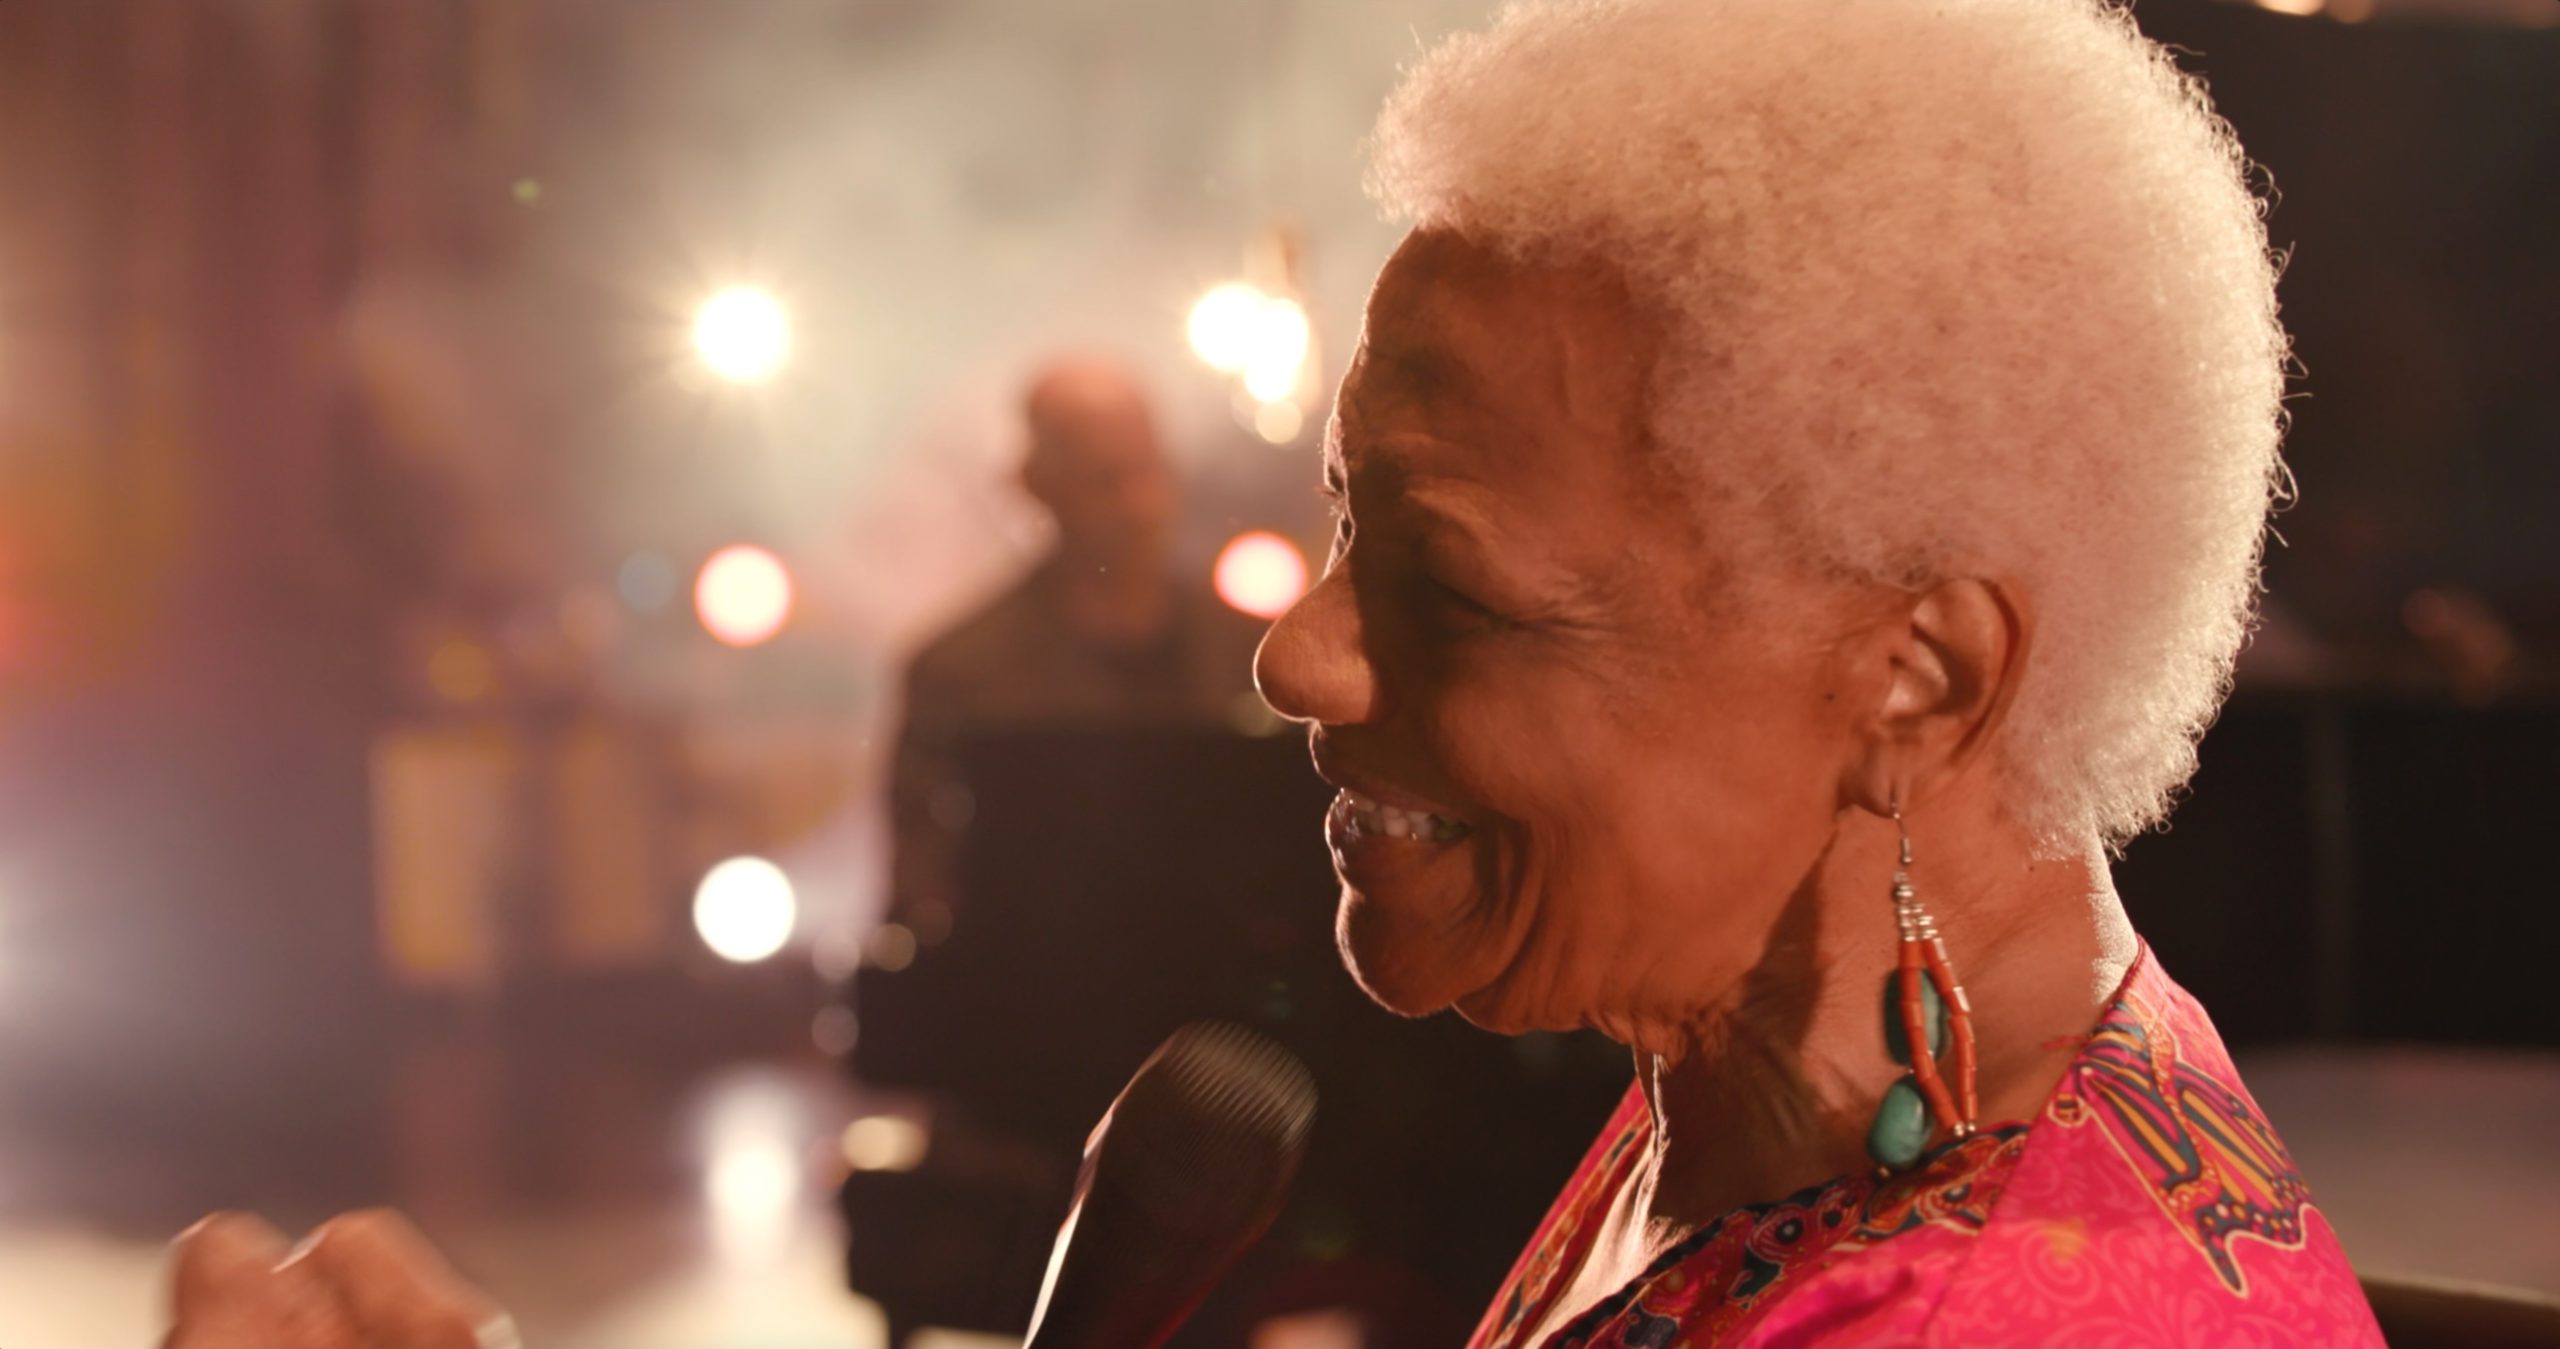 Barbara Morrison with a radiant smile performing on stage, basking in the warm glow of stage lights and a joyful atmosphere.